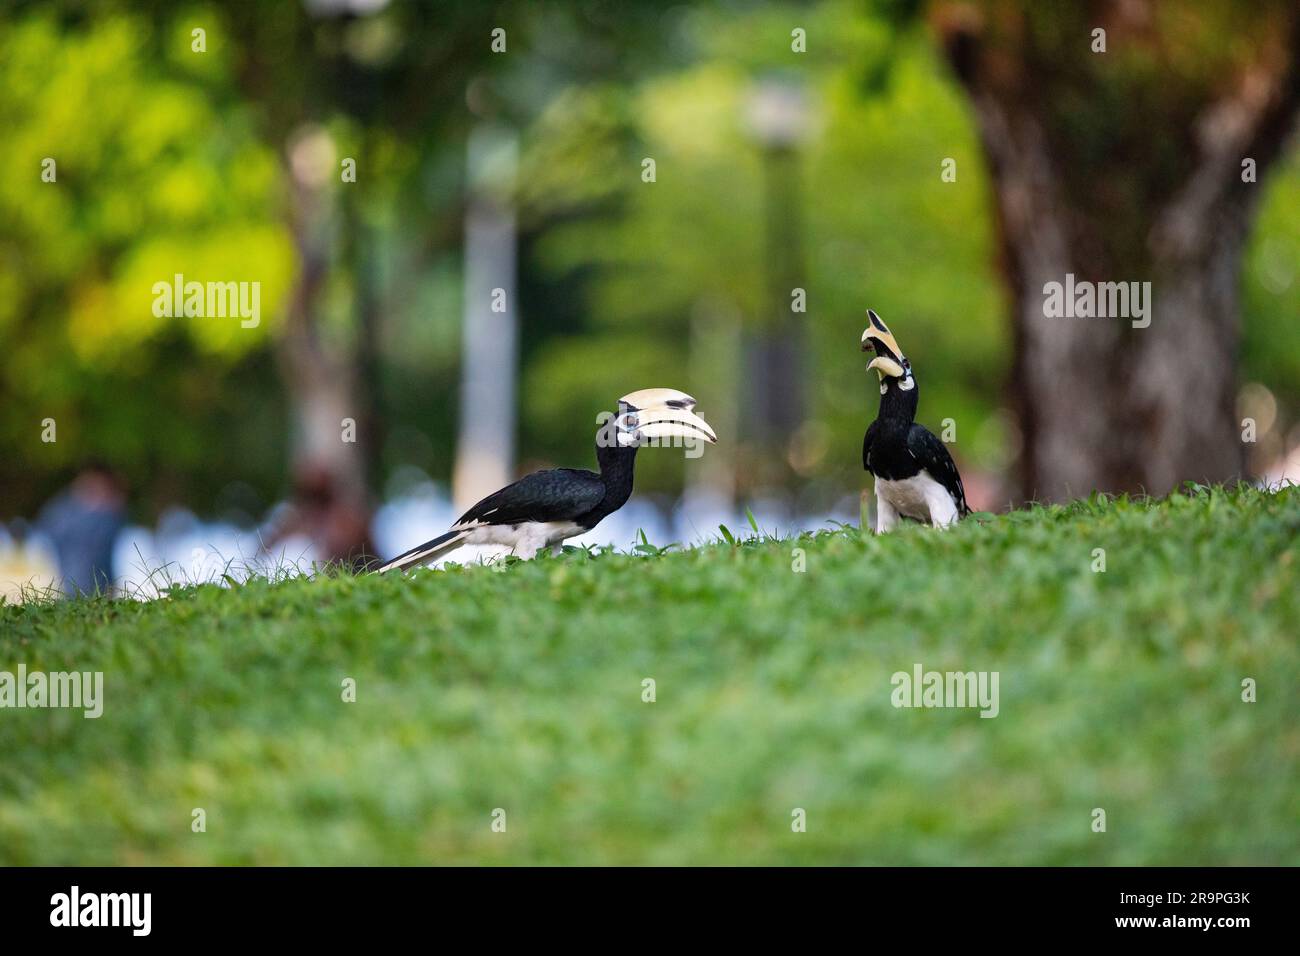 A pair of adult male orientlal pied hornbills forage on the ground in a park, Singapore Stock Photo